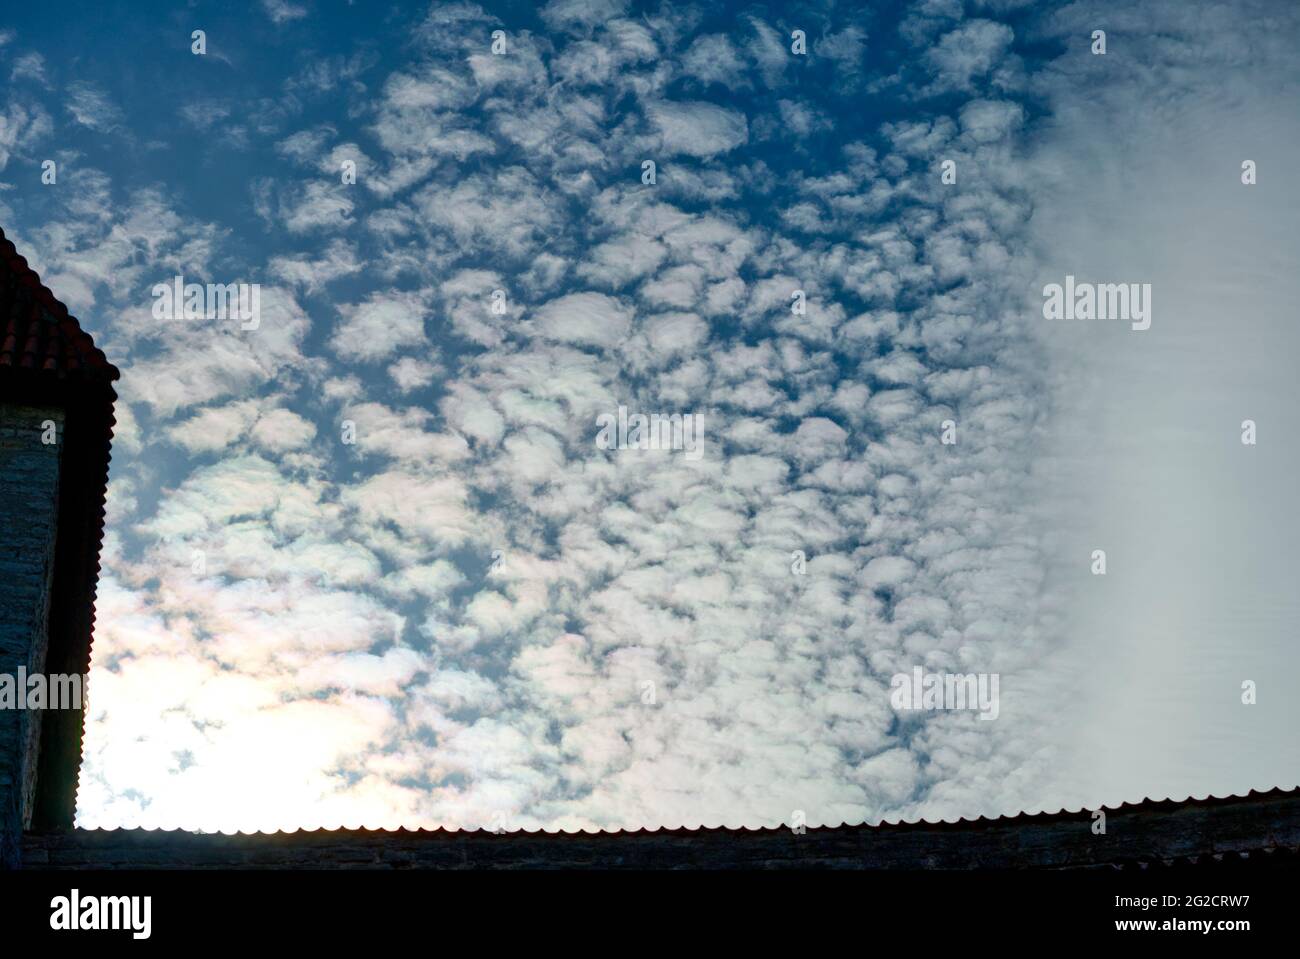 White fluffy clouds in the city with the outline of houses. Cloud time lapse nature background Stock Photo